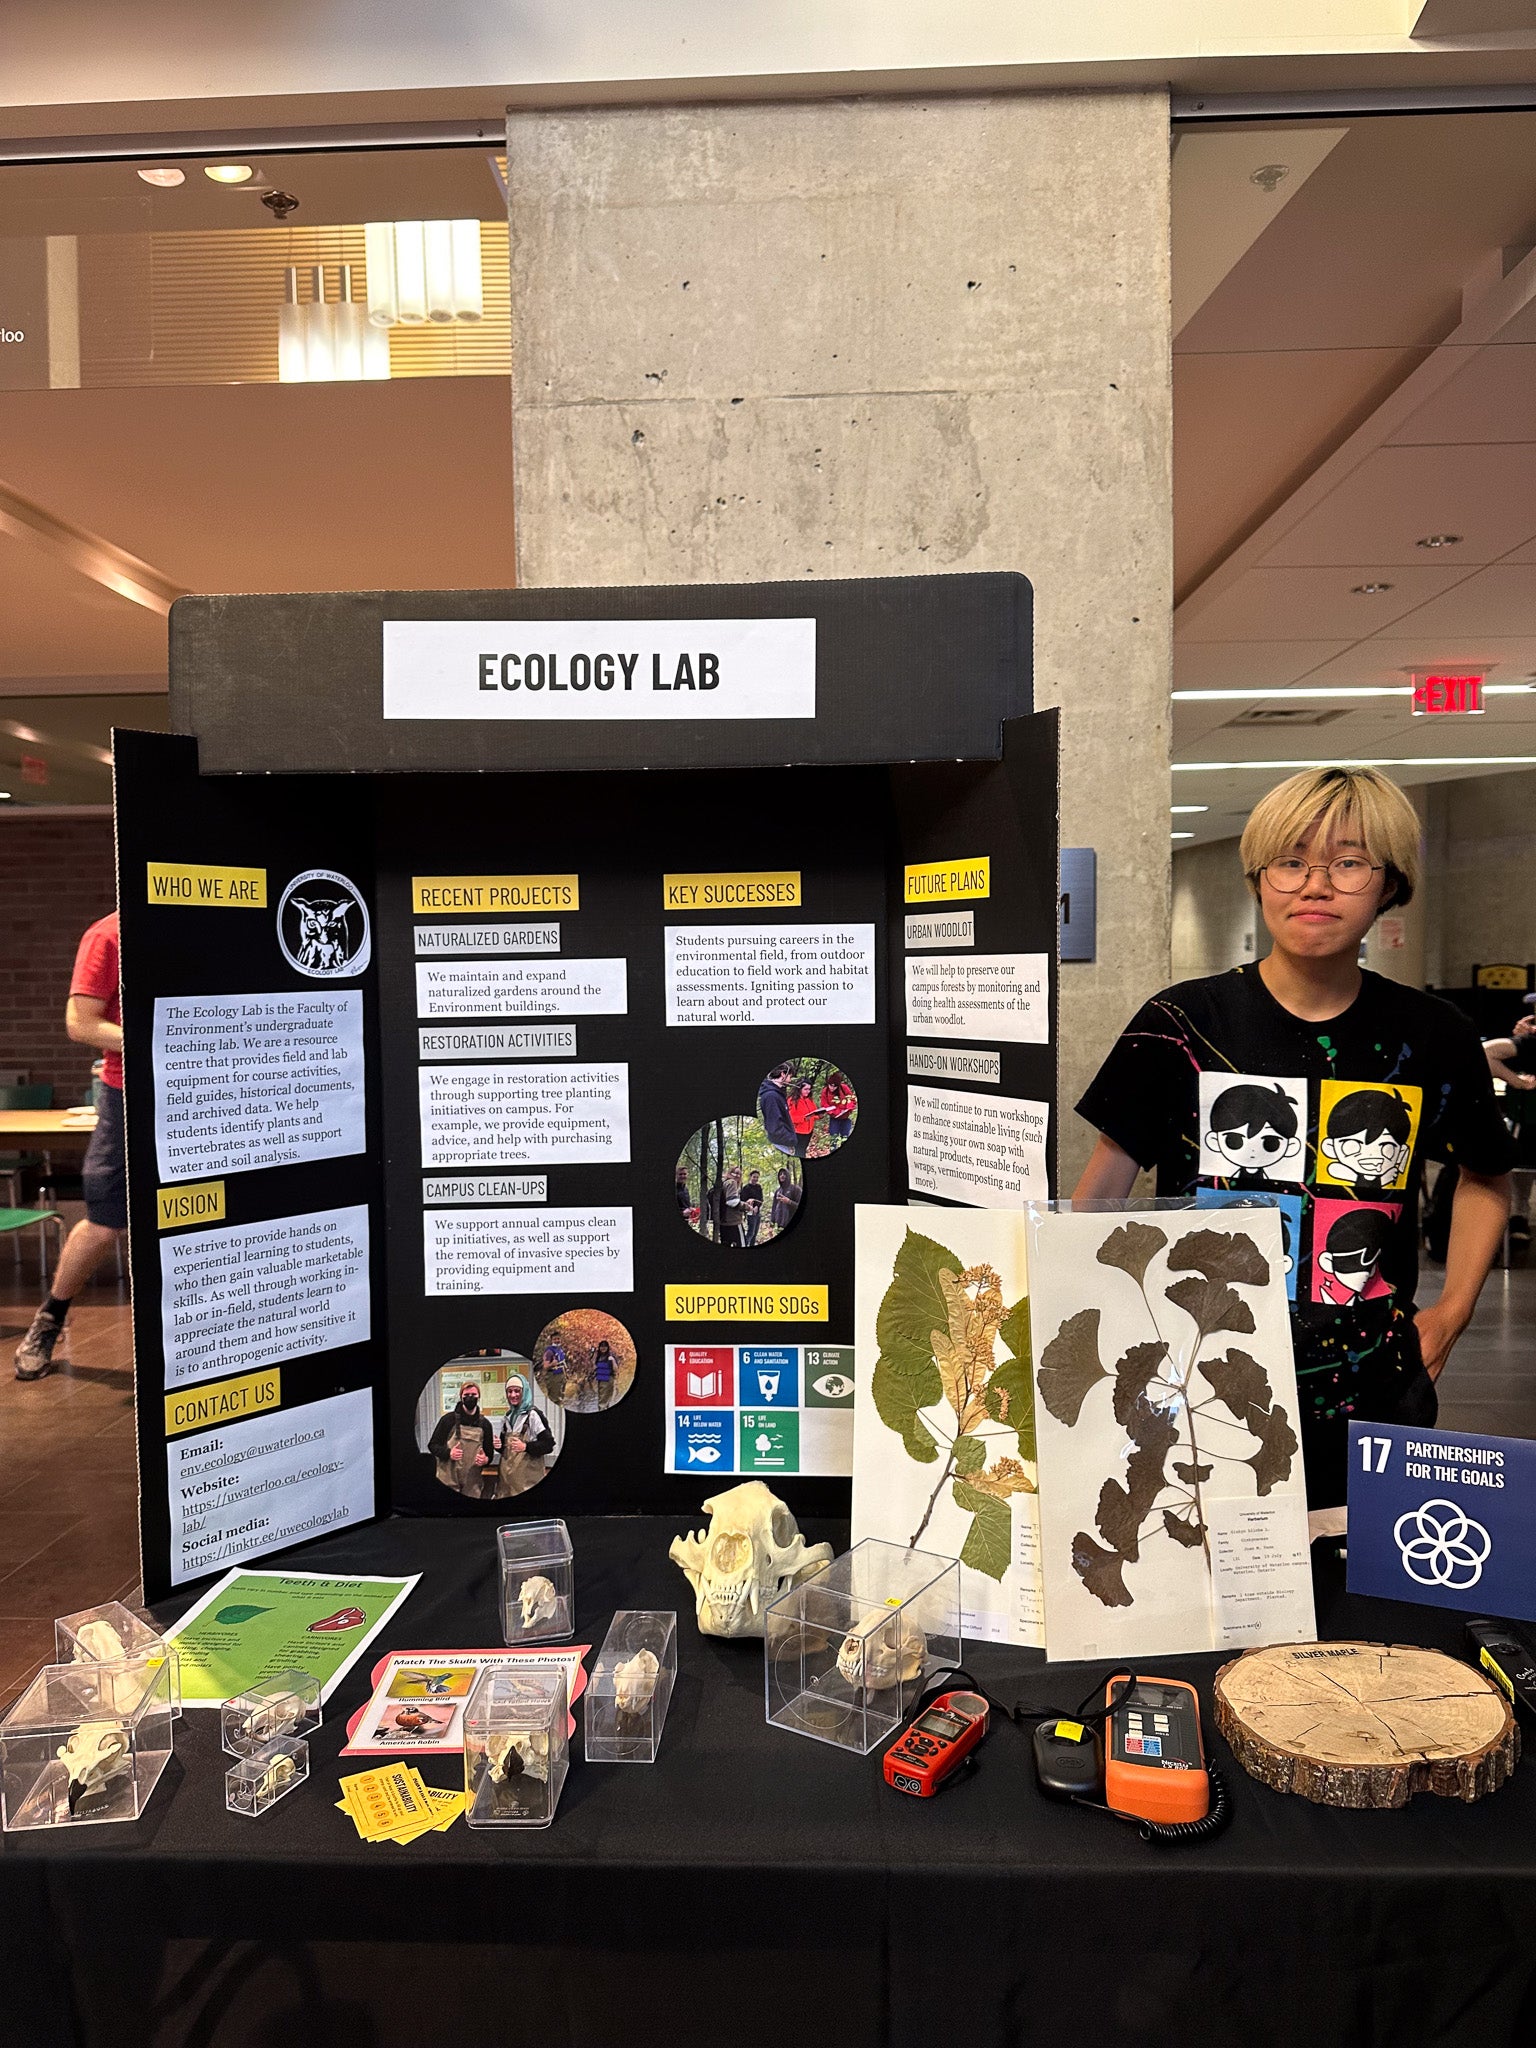 Ecology lab booth at the BioBlitz event